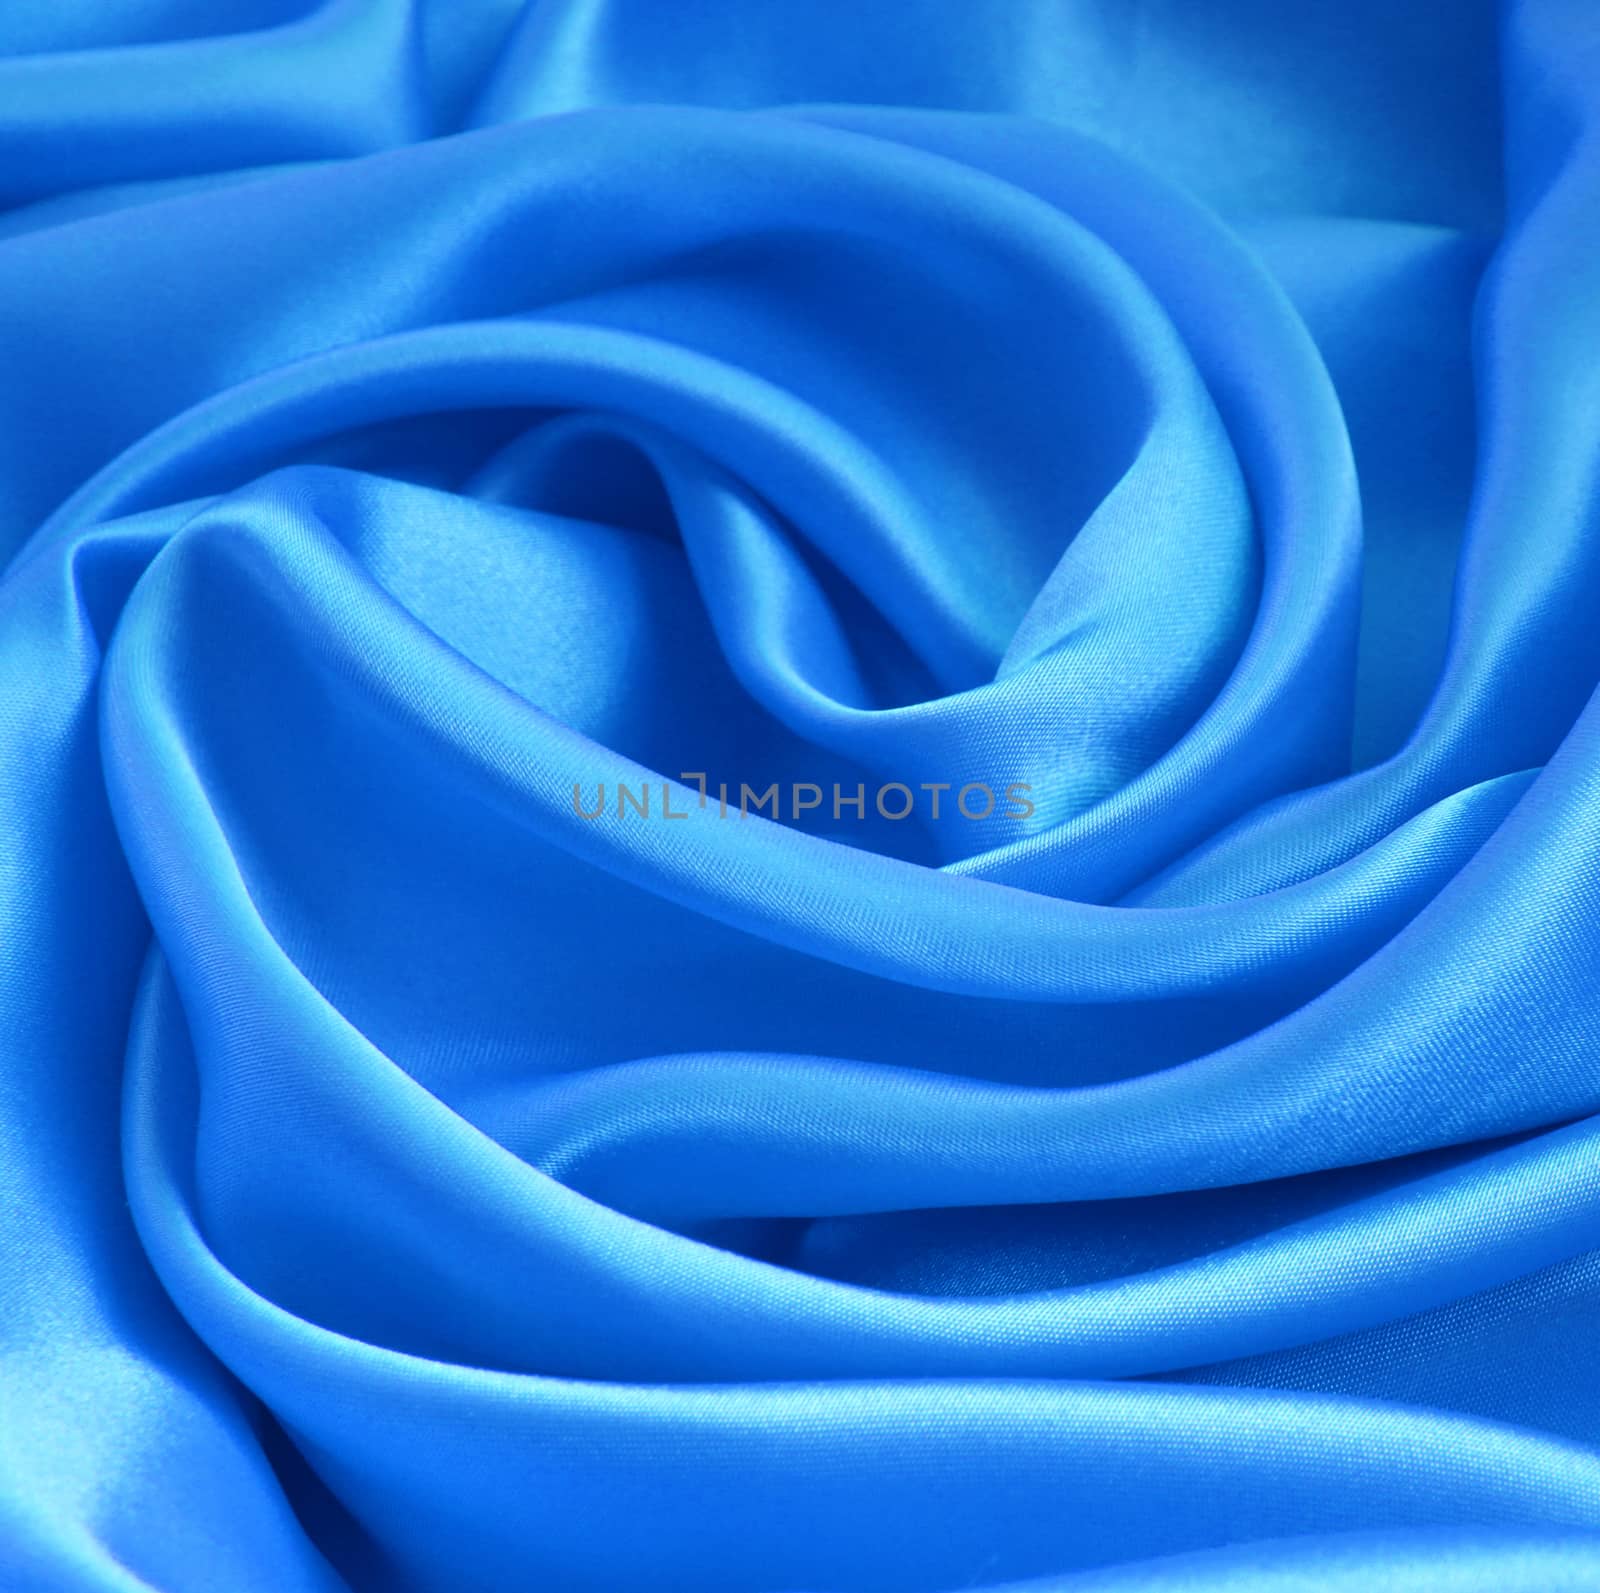 Smooth blue silk as background  by oxanatravel